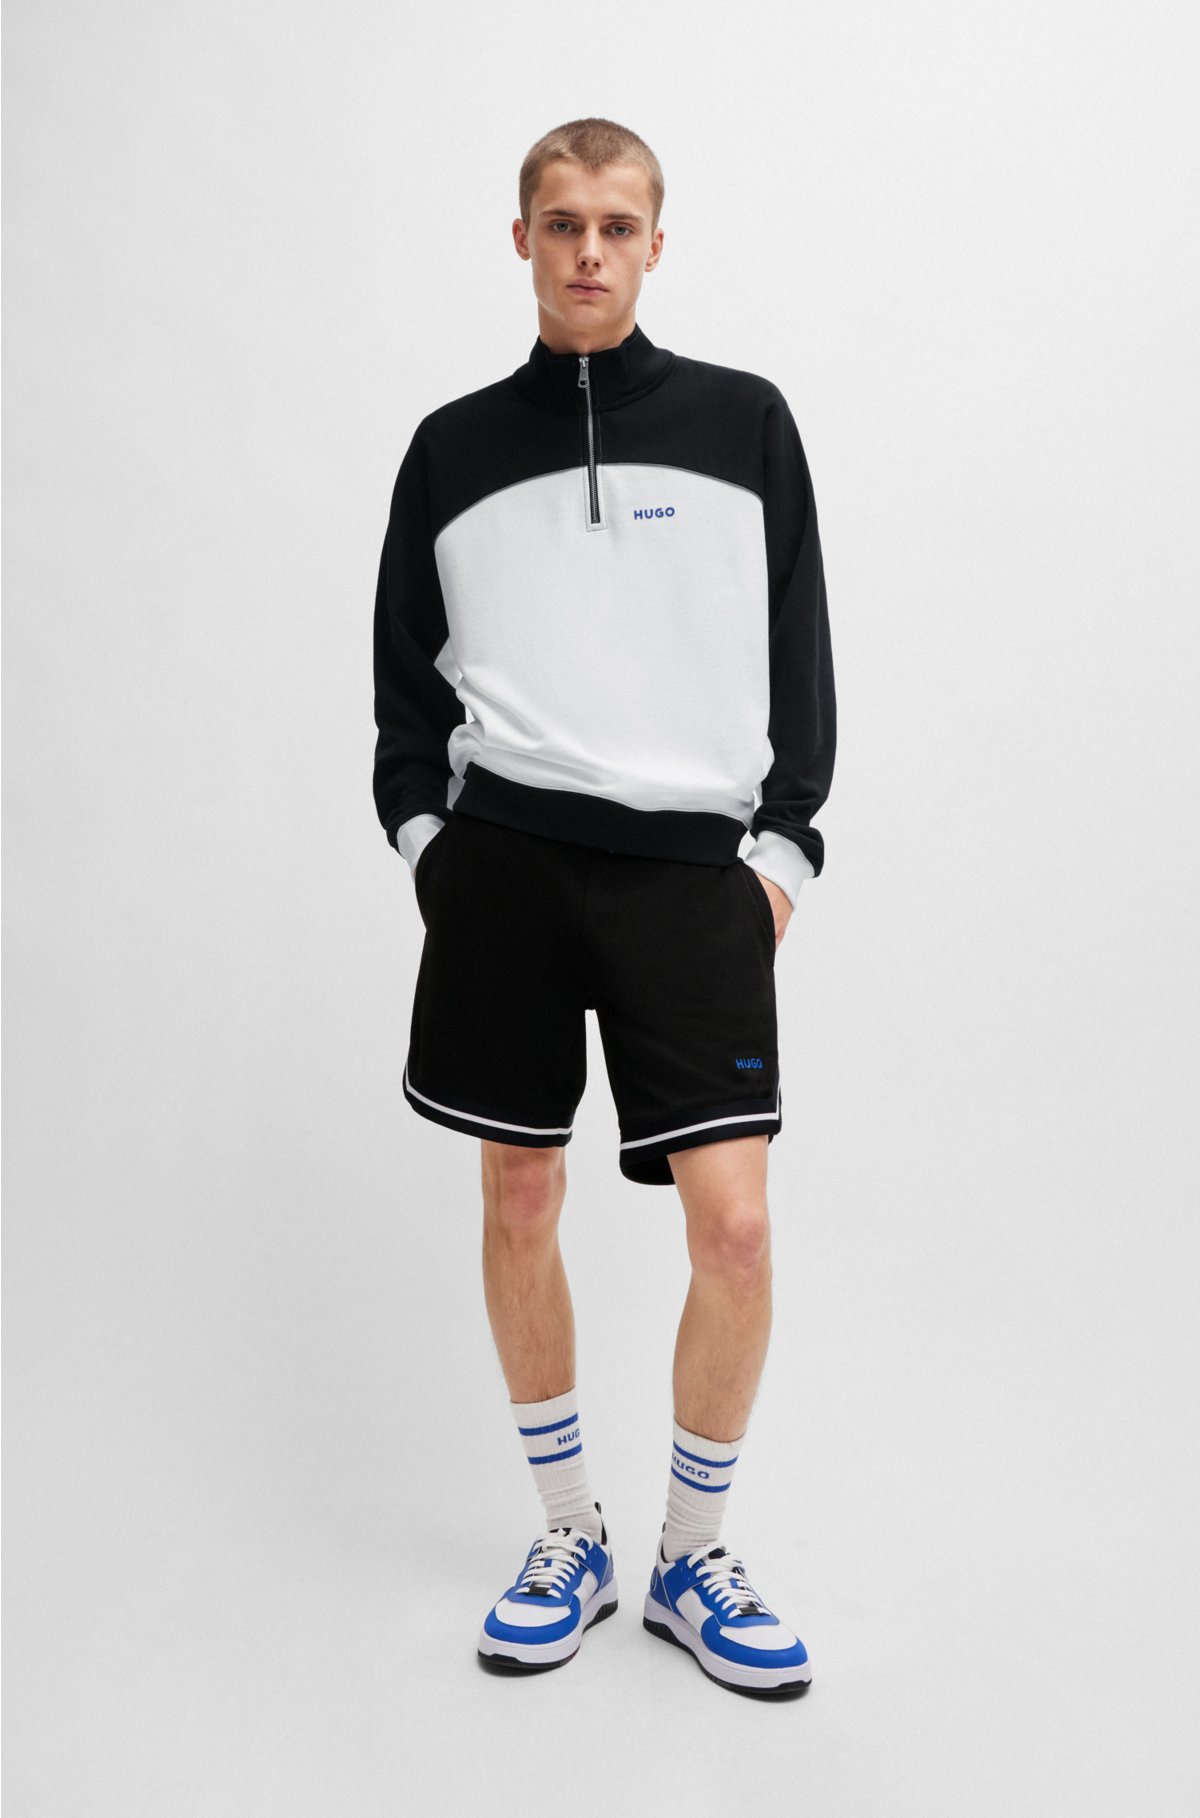 Mesh shorts with contrast logo and tape, Black